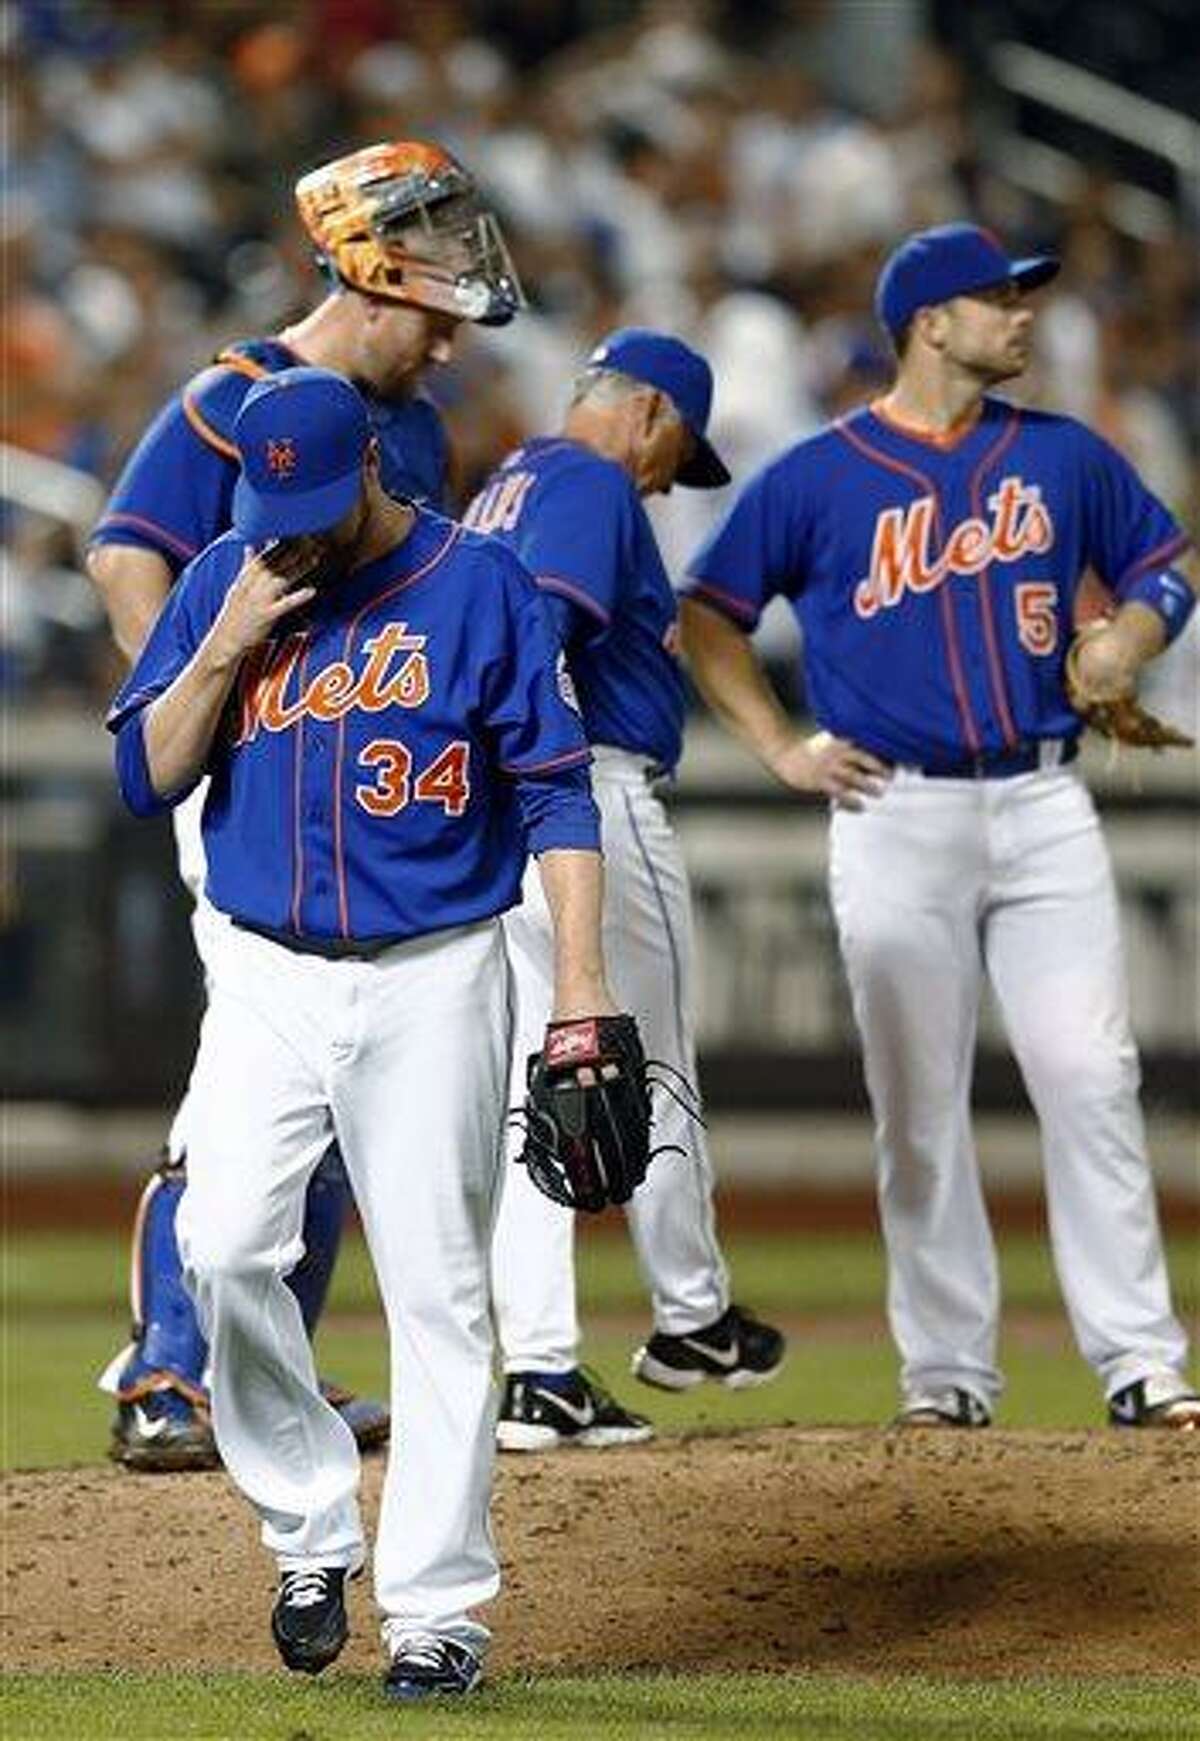 New York Mets relief pitcher Brandon Lyon (34) walks off the mound after being pulled from the baseball game after he gave up a three-run double in the eighth inning in a baseball game against the Washington Nationals in New York, Friday, June 28, 2013. (AP Photo/Paul J. Bereswill)